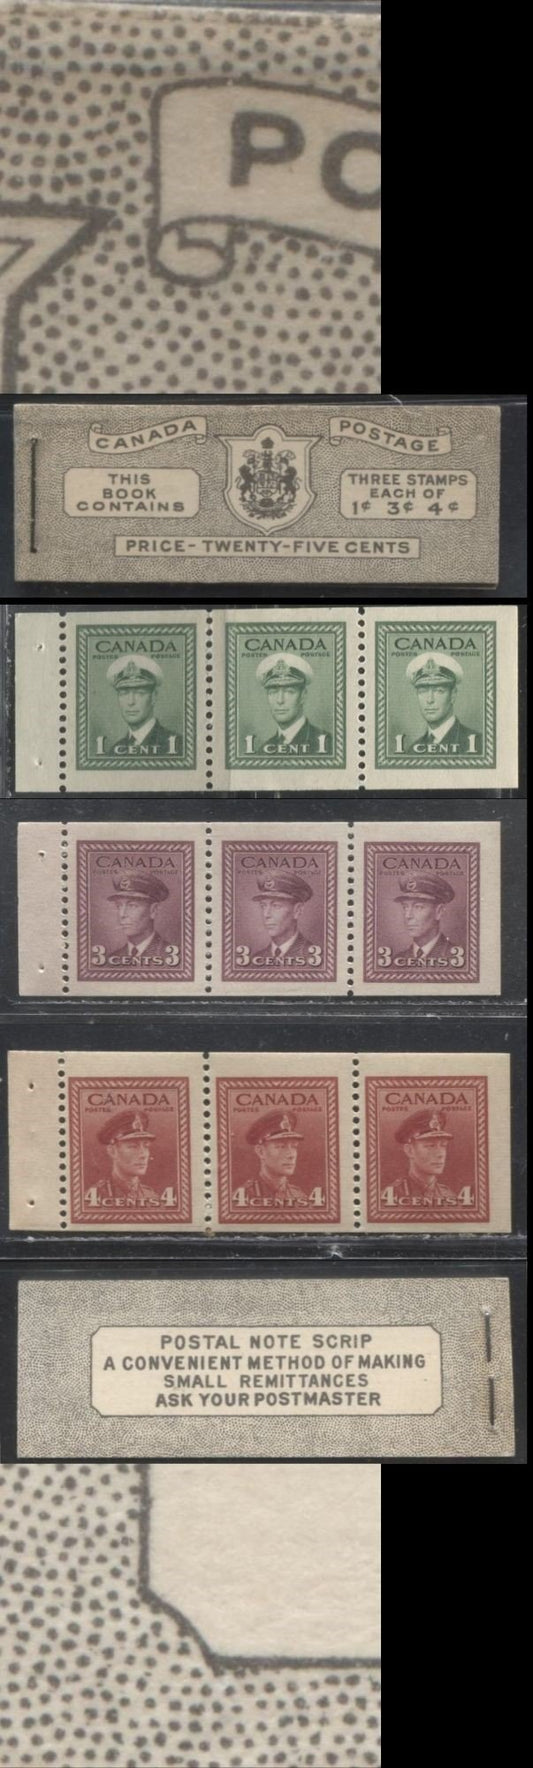 Lot 193 Canada #BK38a 1942-1949 War Issue Complete 25c, English Booklet Containing 1 Pane Each of 3 of 1c Green, 3c Rosy Plum and 4c Carmine Red, Harris Front Cover Type IVd , Back Cover Haii, 7c & 6c Rate Page